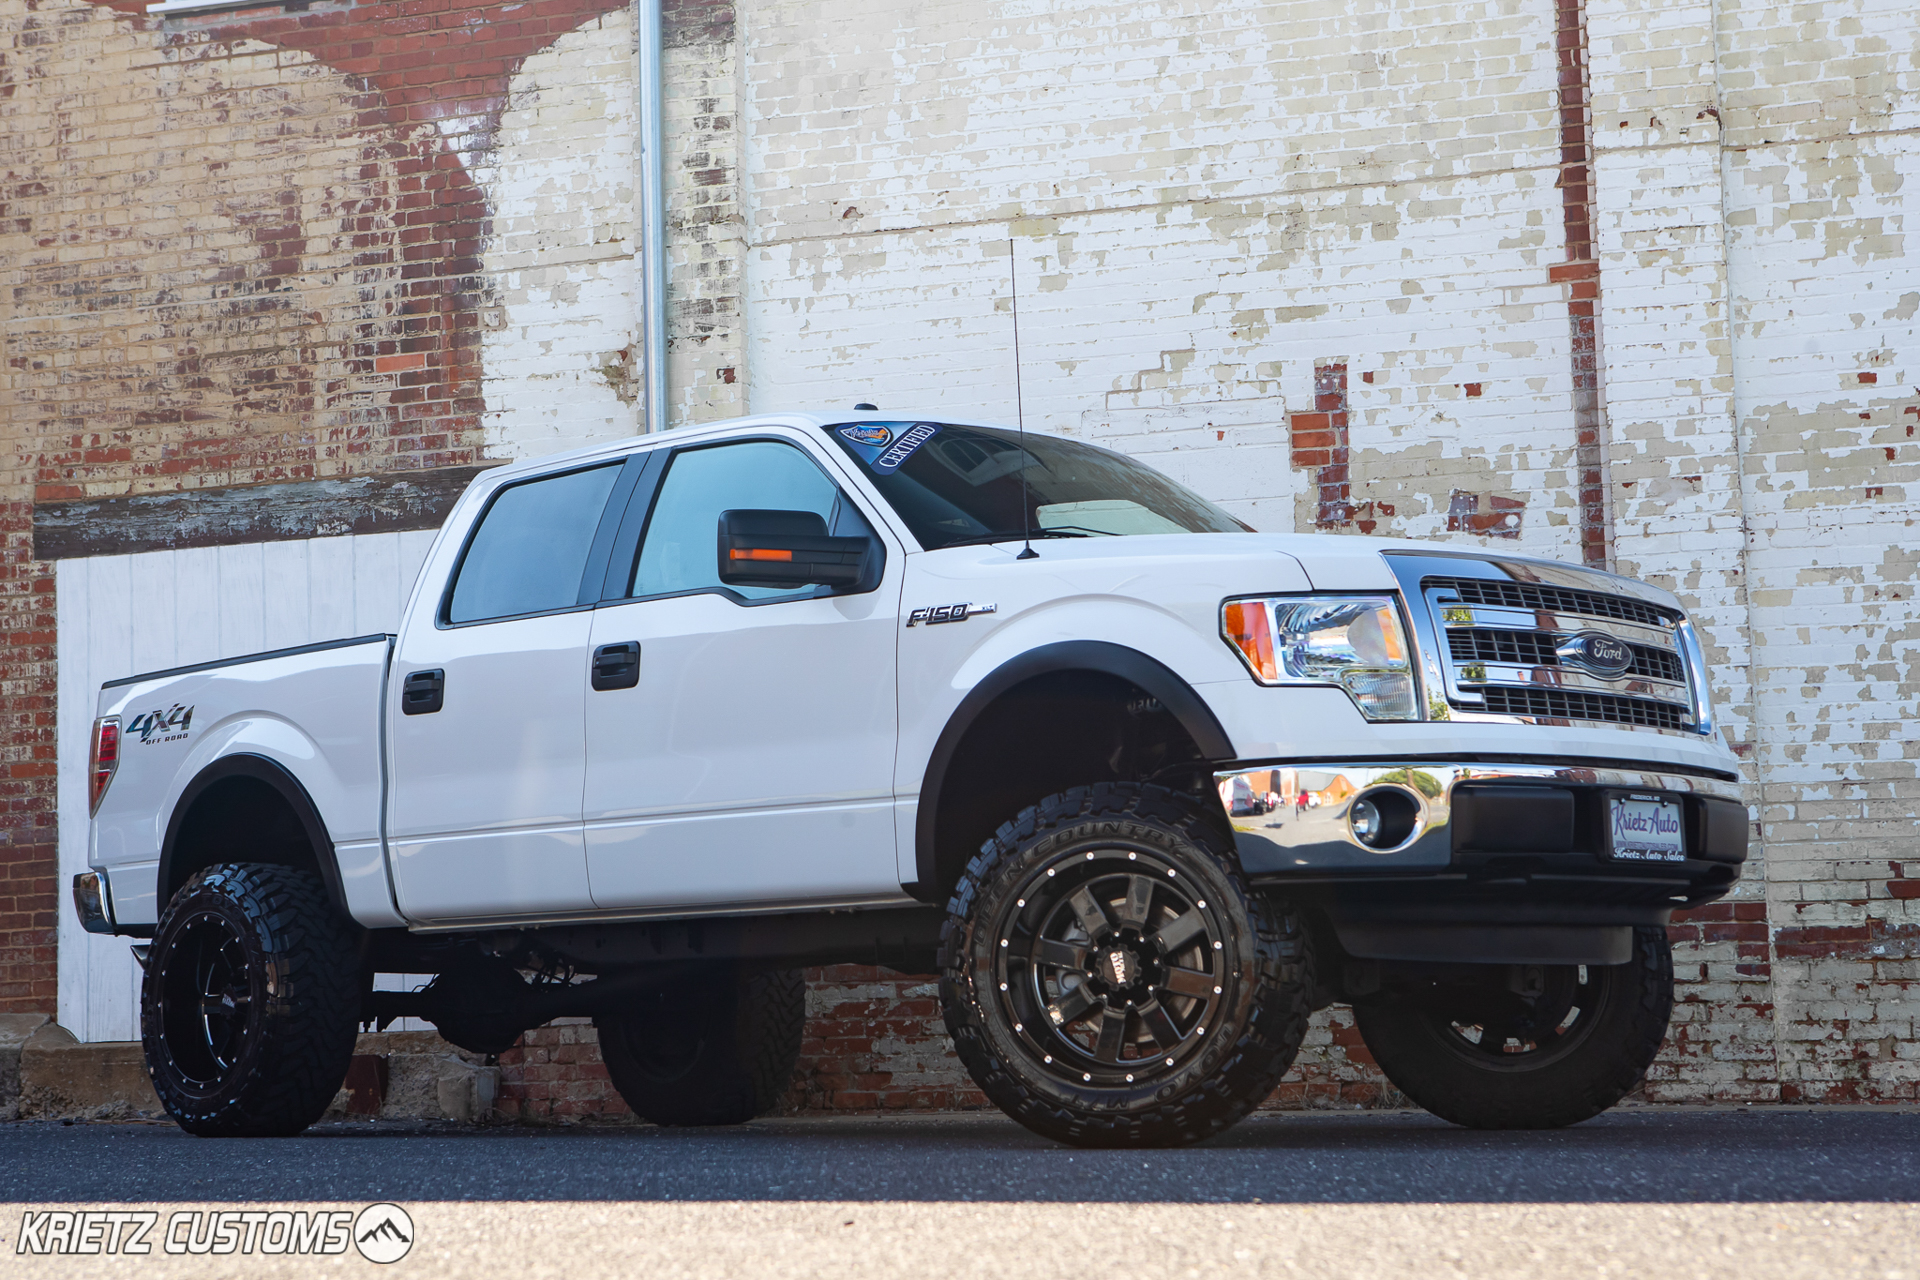 Lifted 2014 Ford F150 with MO962 Wheels Krietz Auto